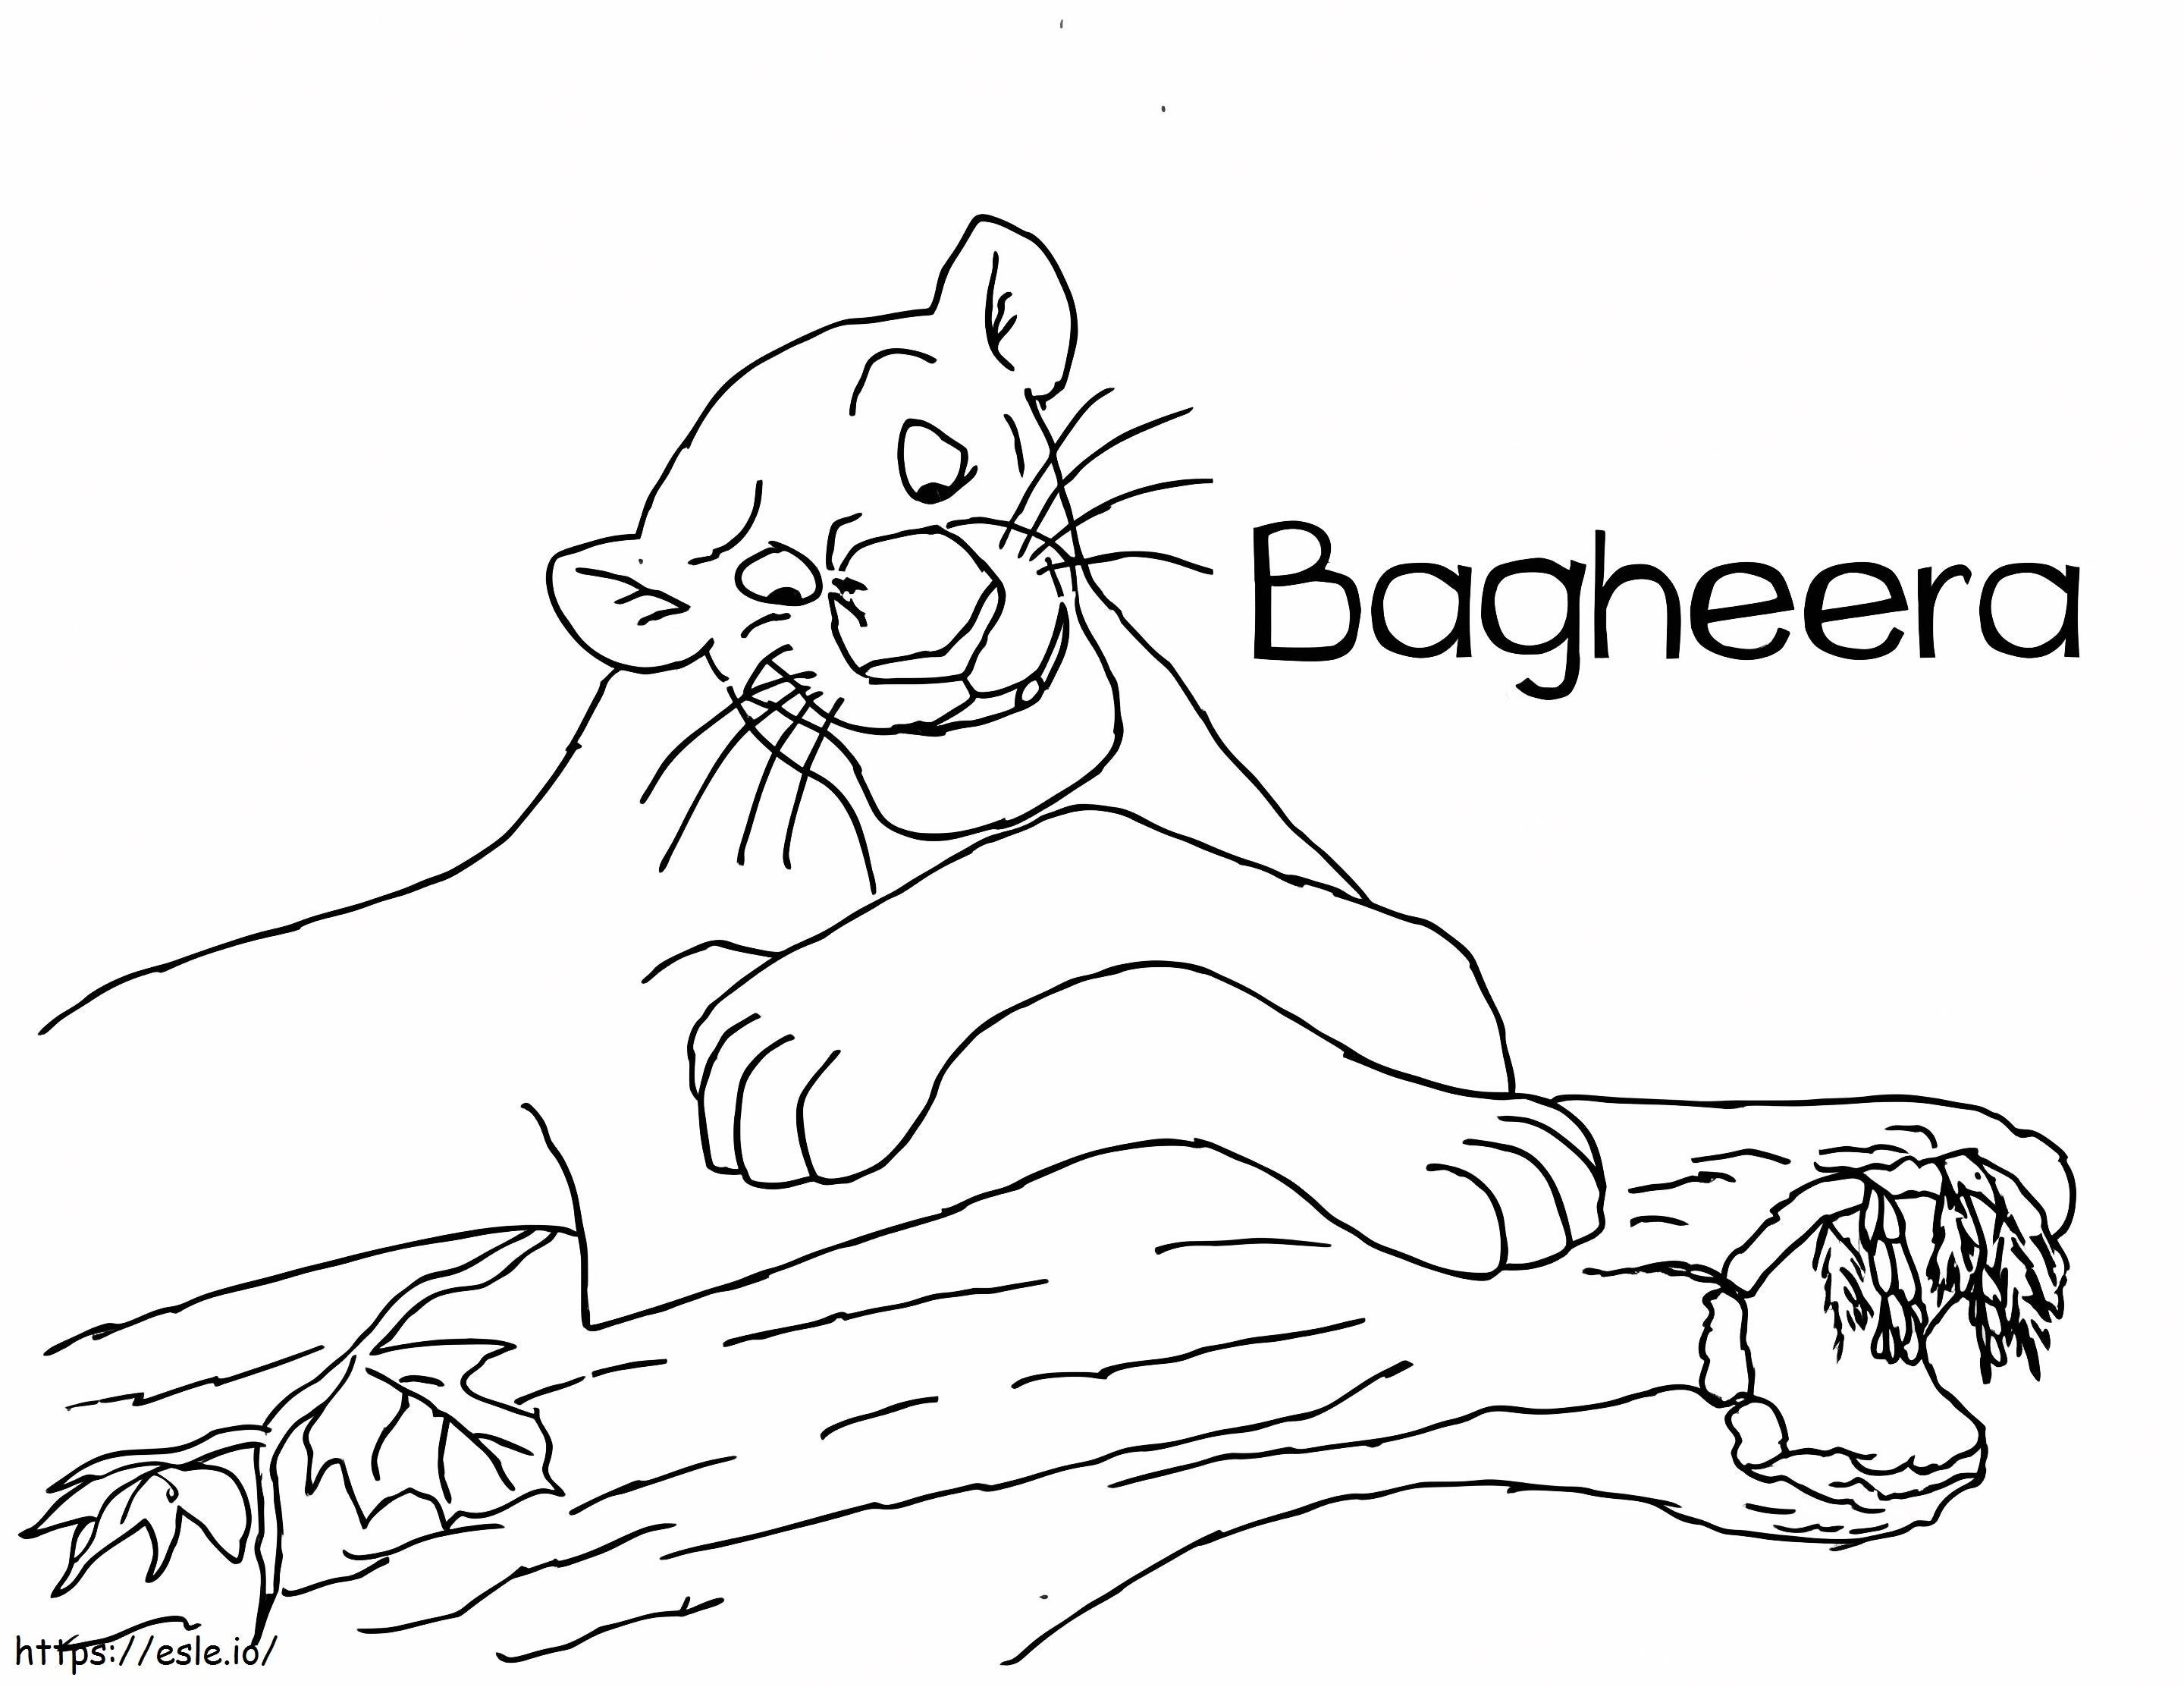 Bagheera Smiling On Tree Branch coloring page